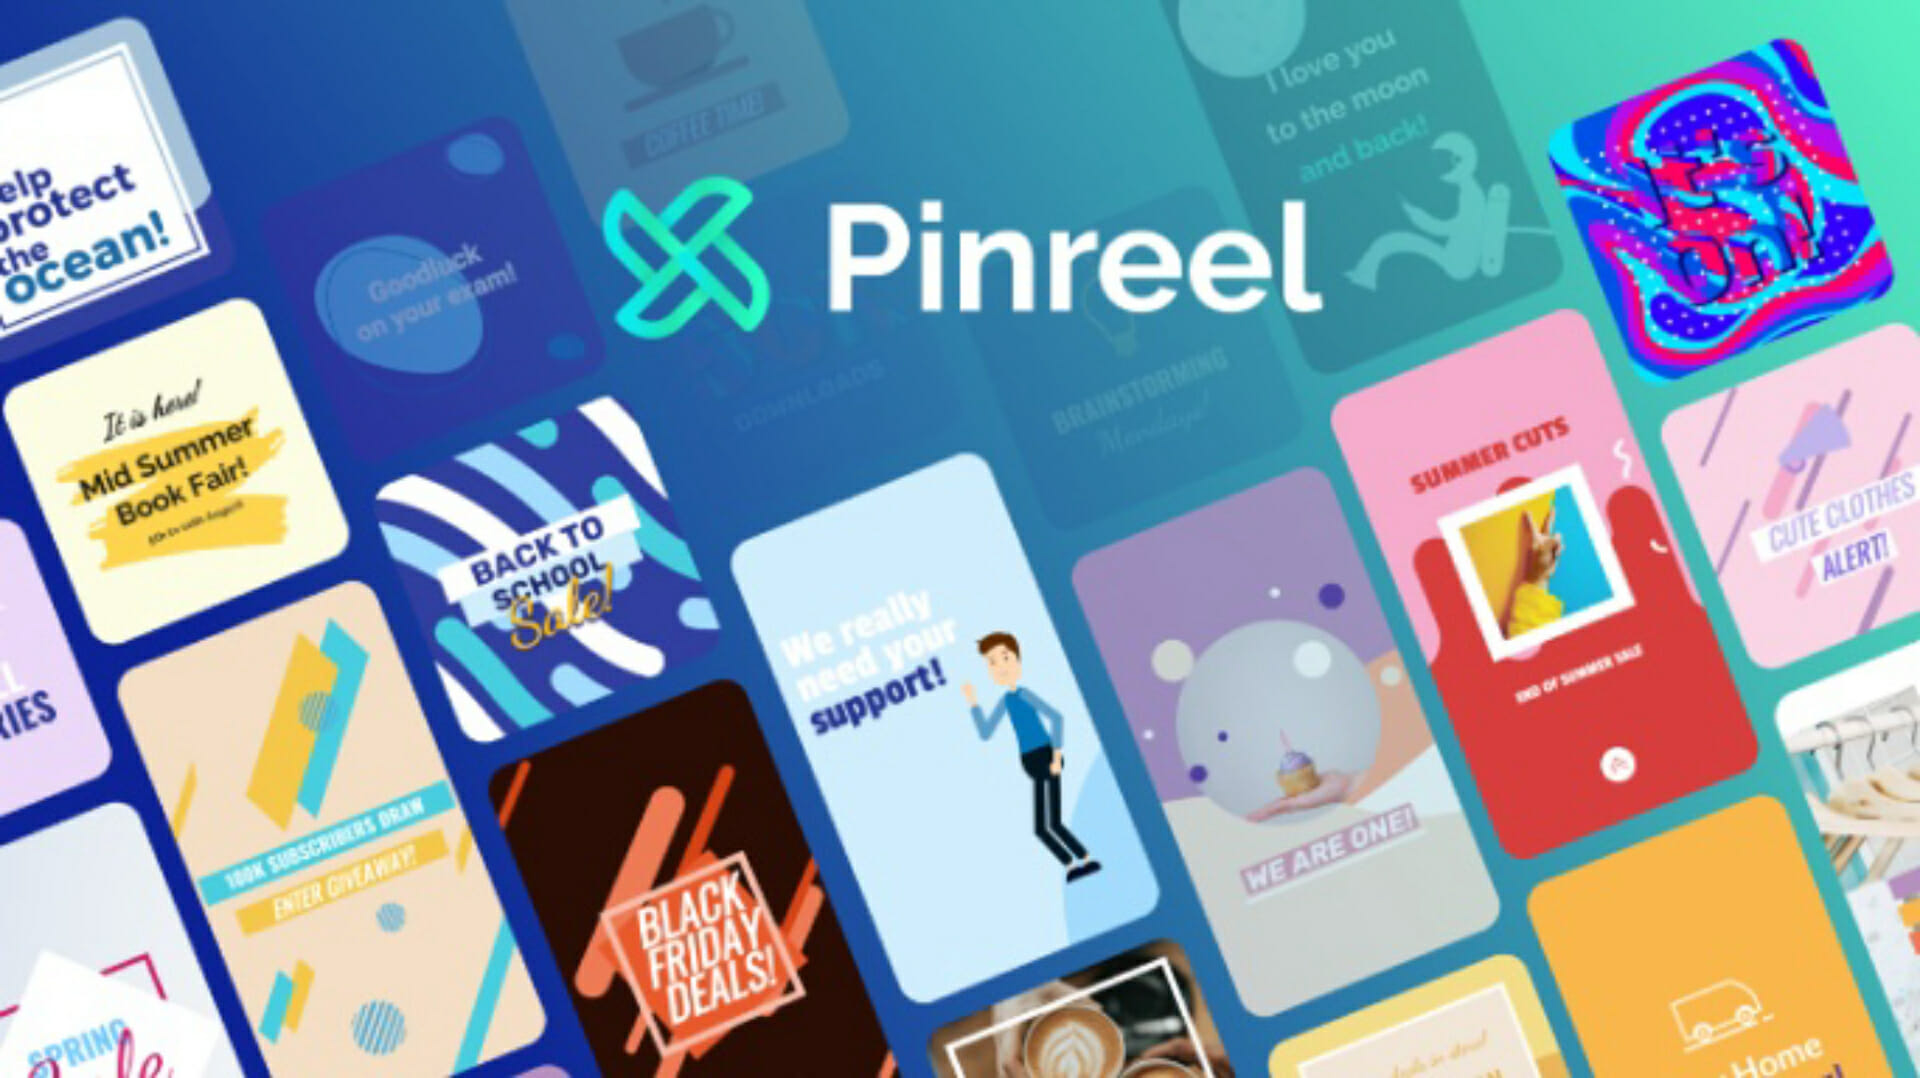 Lifetime Deal to Pinreel: Lifetime Deal for $49